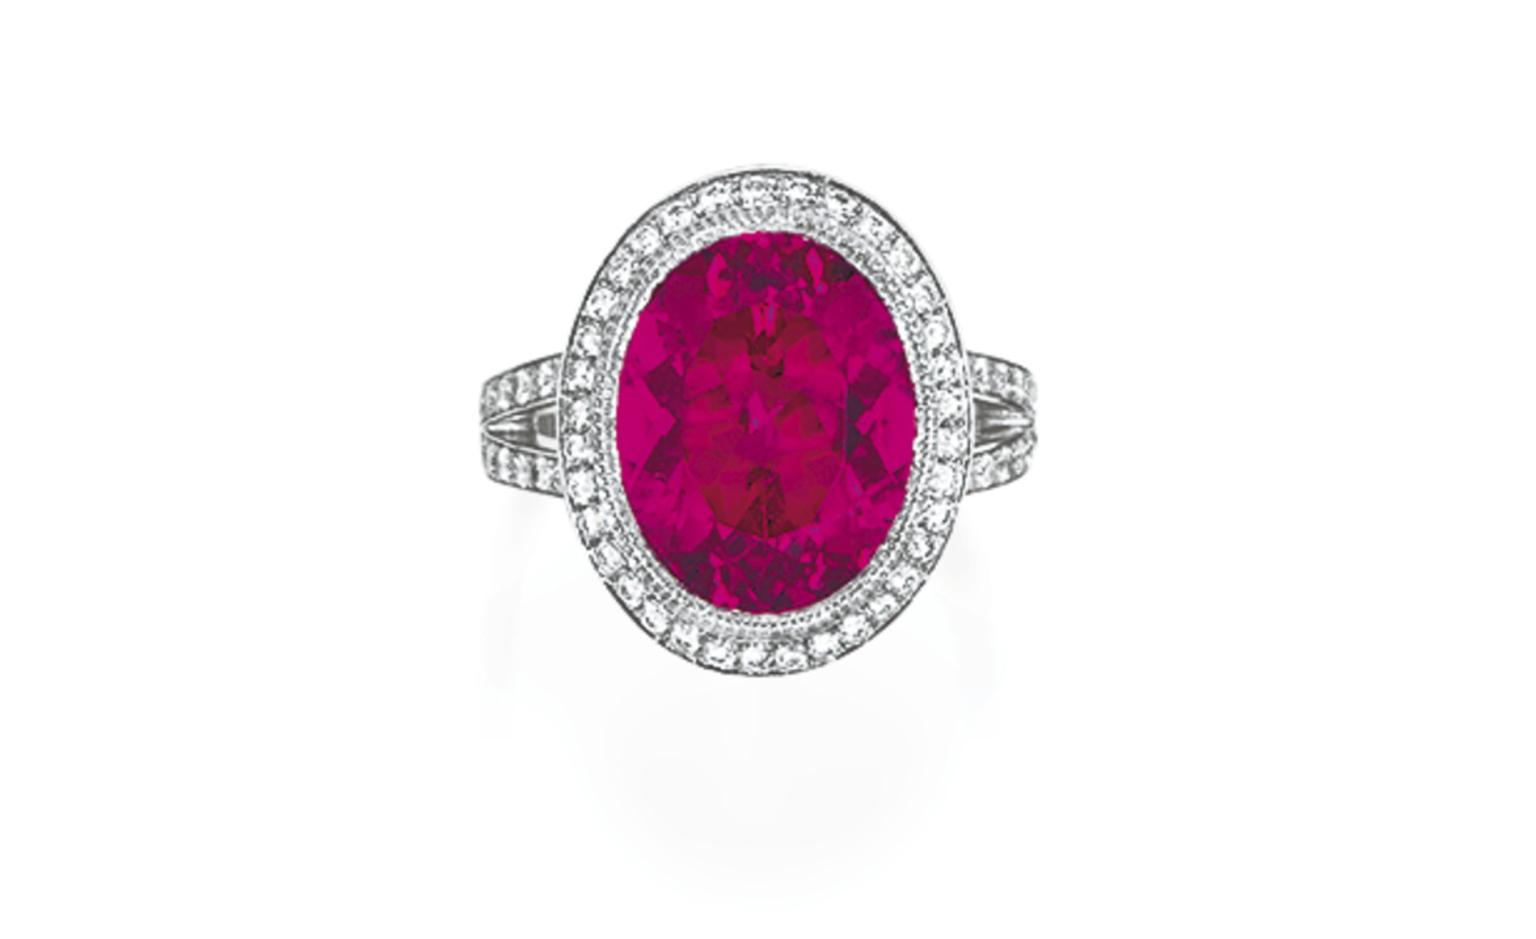 Lot 96. A rubalite tourmaline and diamond ring, by Tiffany & Co. Estimate 2,000 - 3,000 U.S. dollars. SOLD FOR $7,500